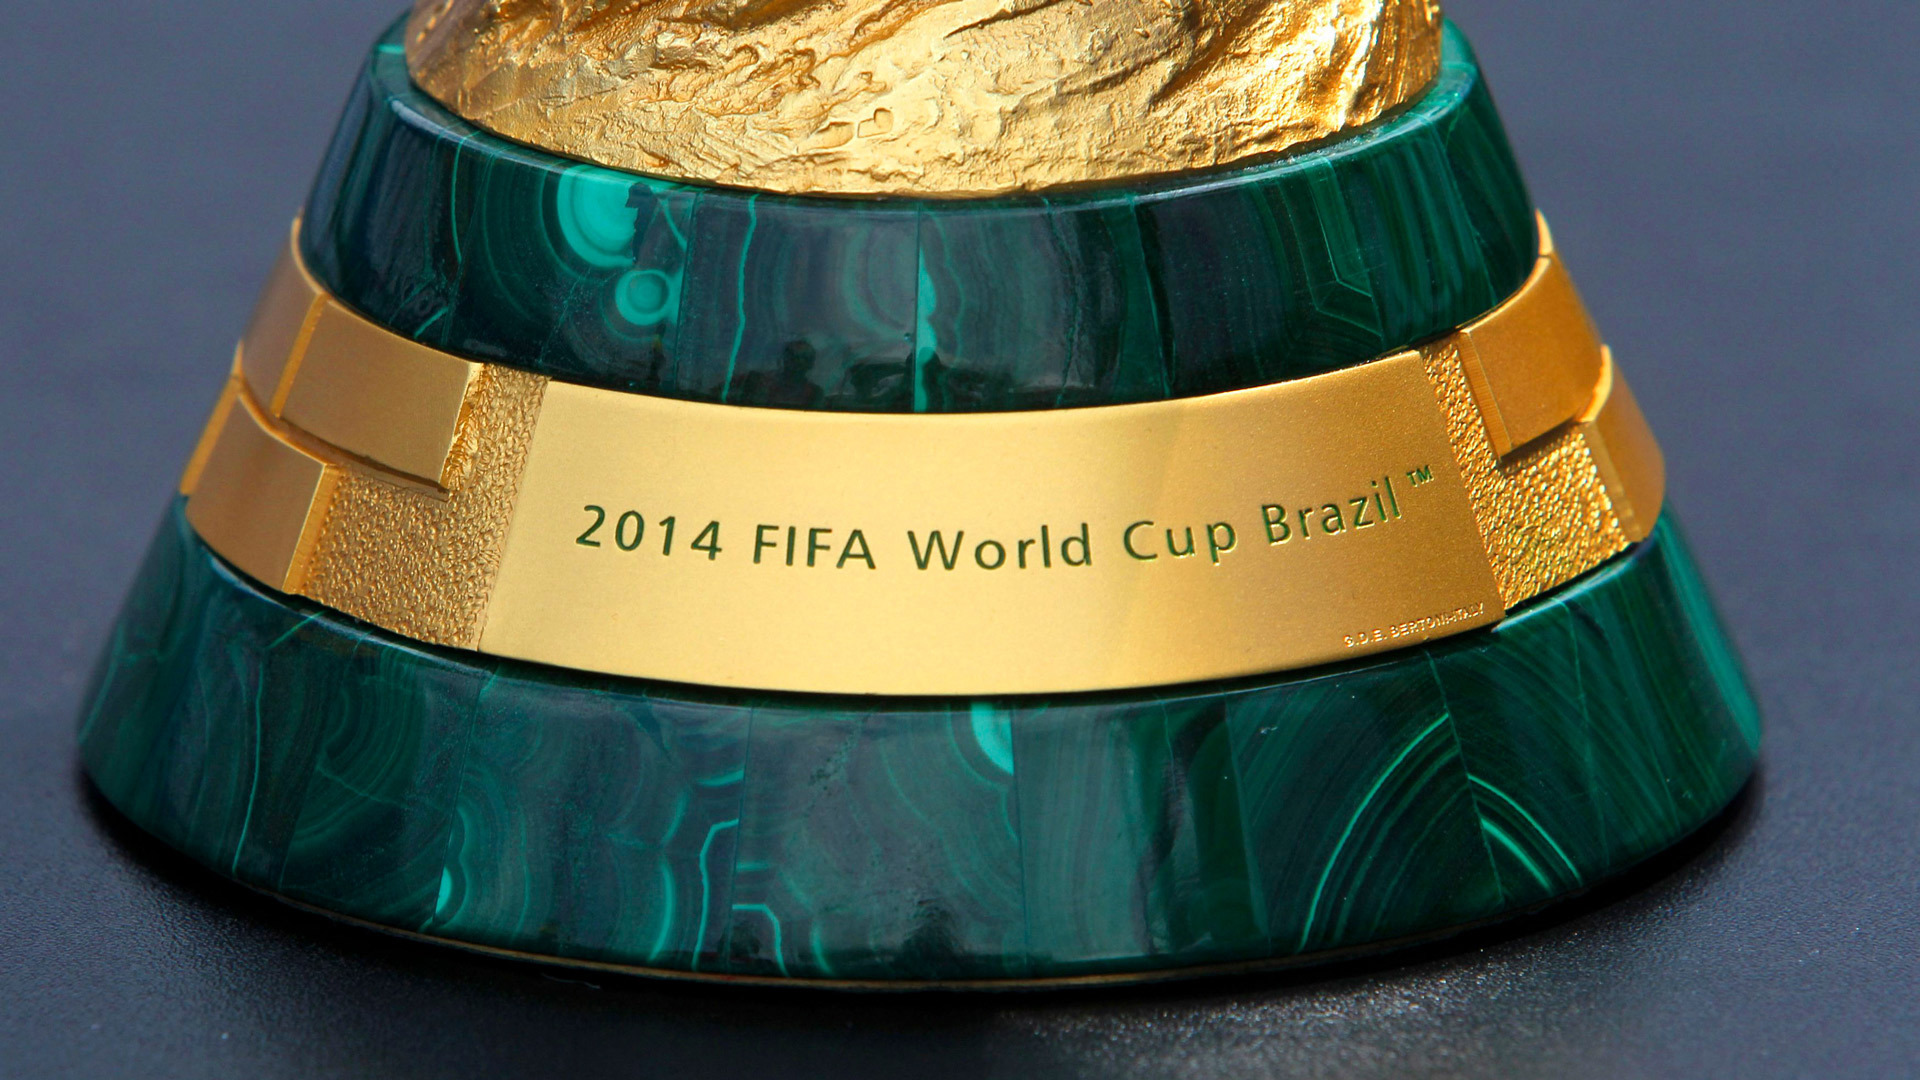 FIFA World Cup 2014 Wallpaper design magazine with tutorials, resources and inspiration